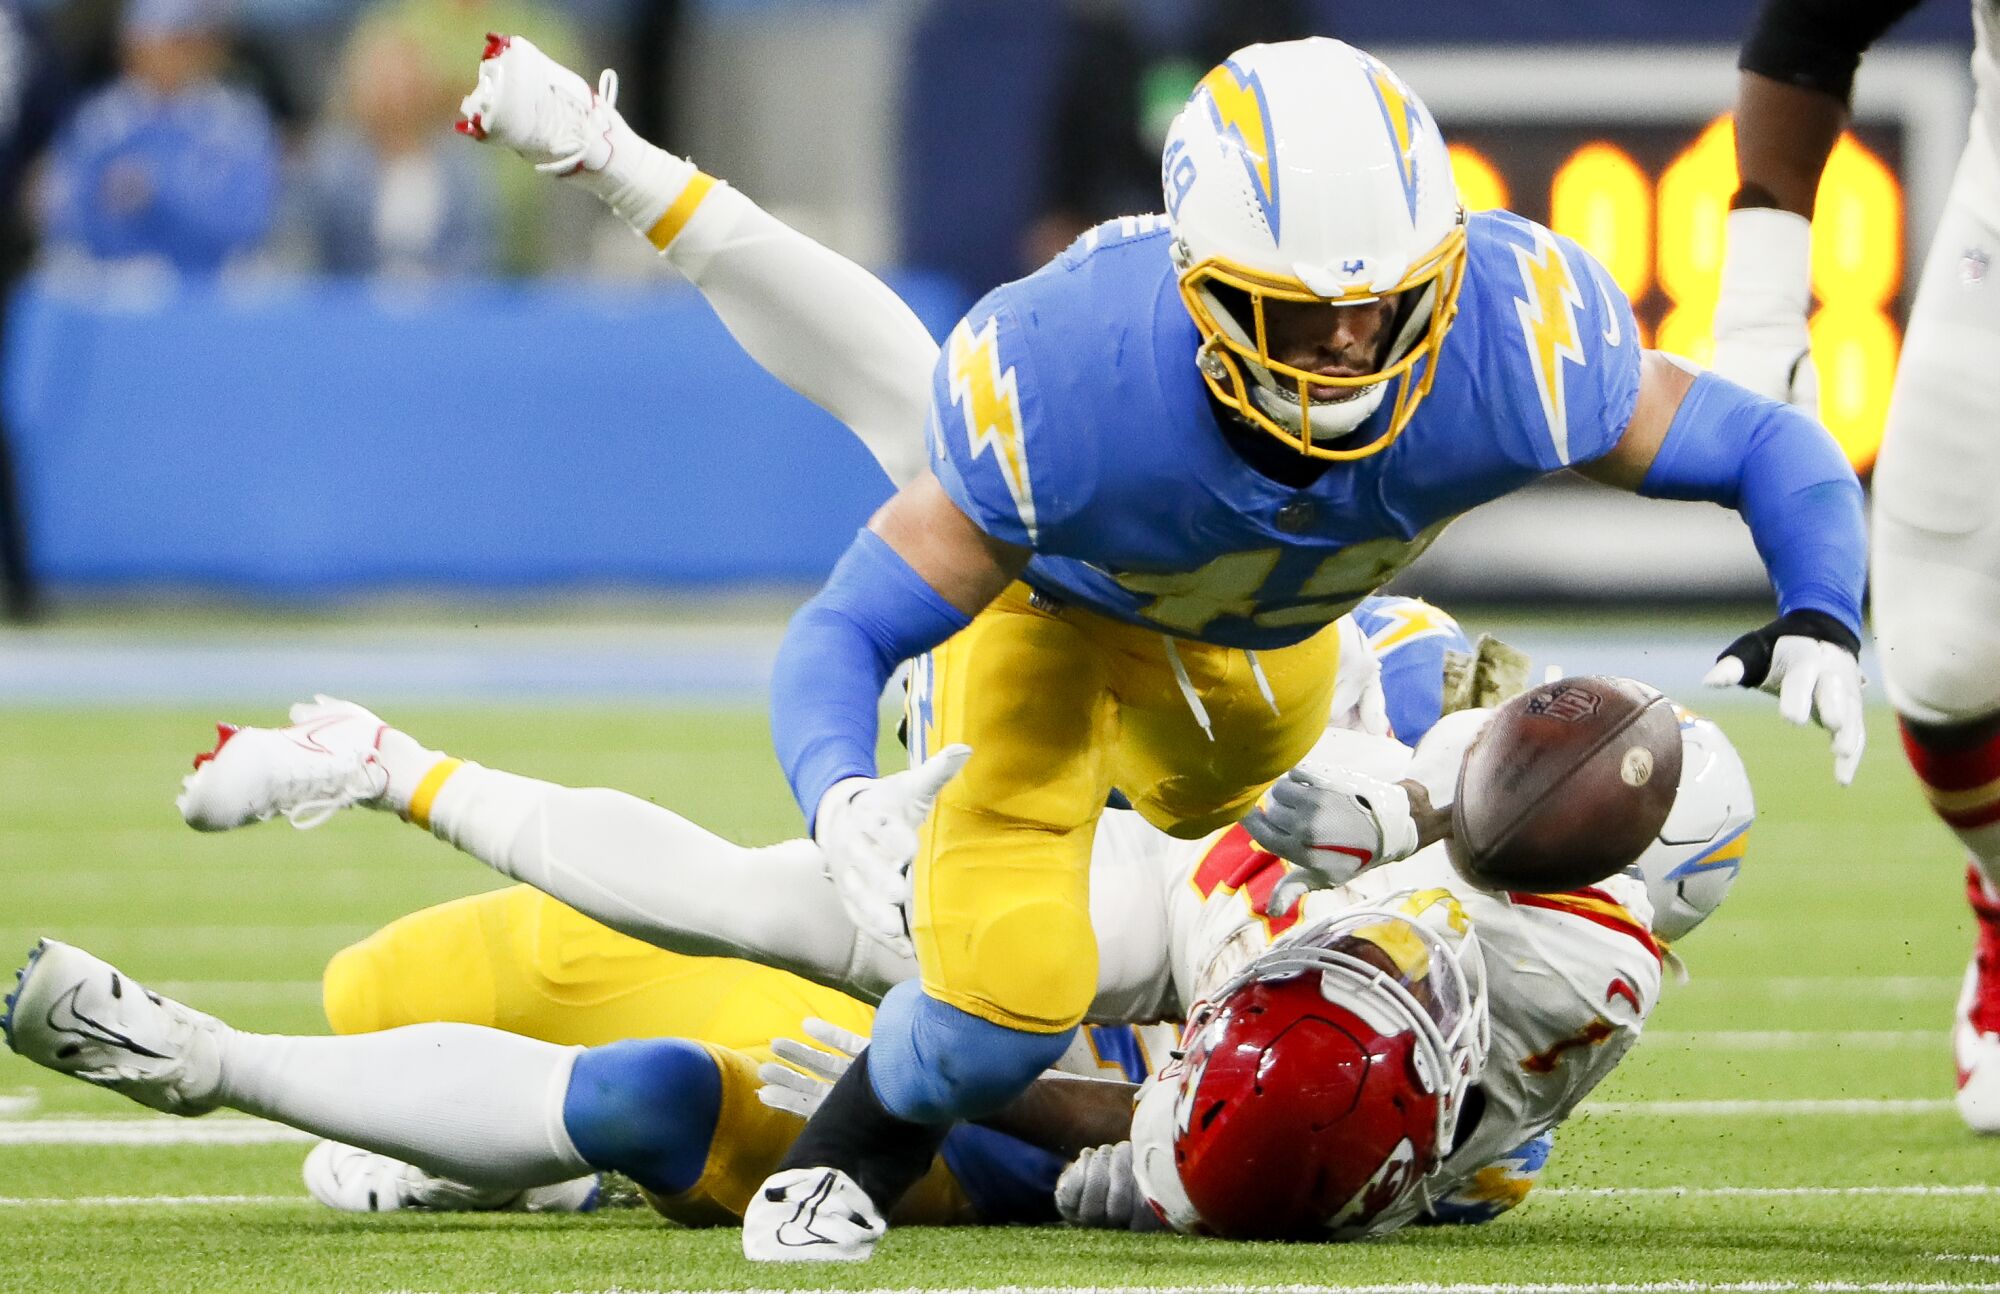 Chargers linebacker Drue Tranquill dives for the ball after a fumble by Chiefs running back Jerick McKinnon.